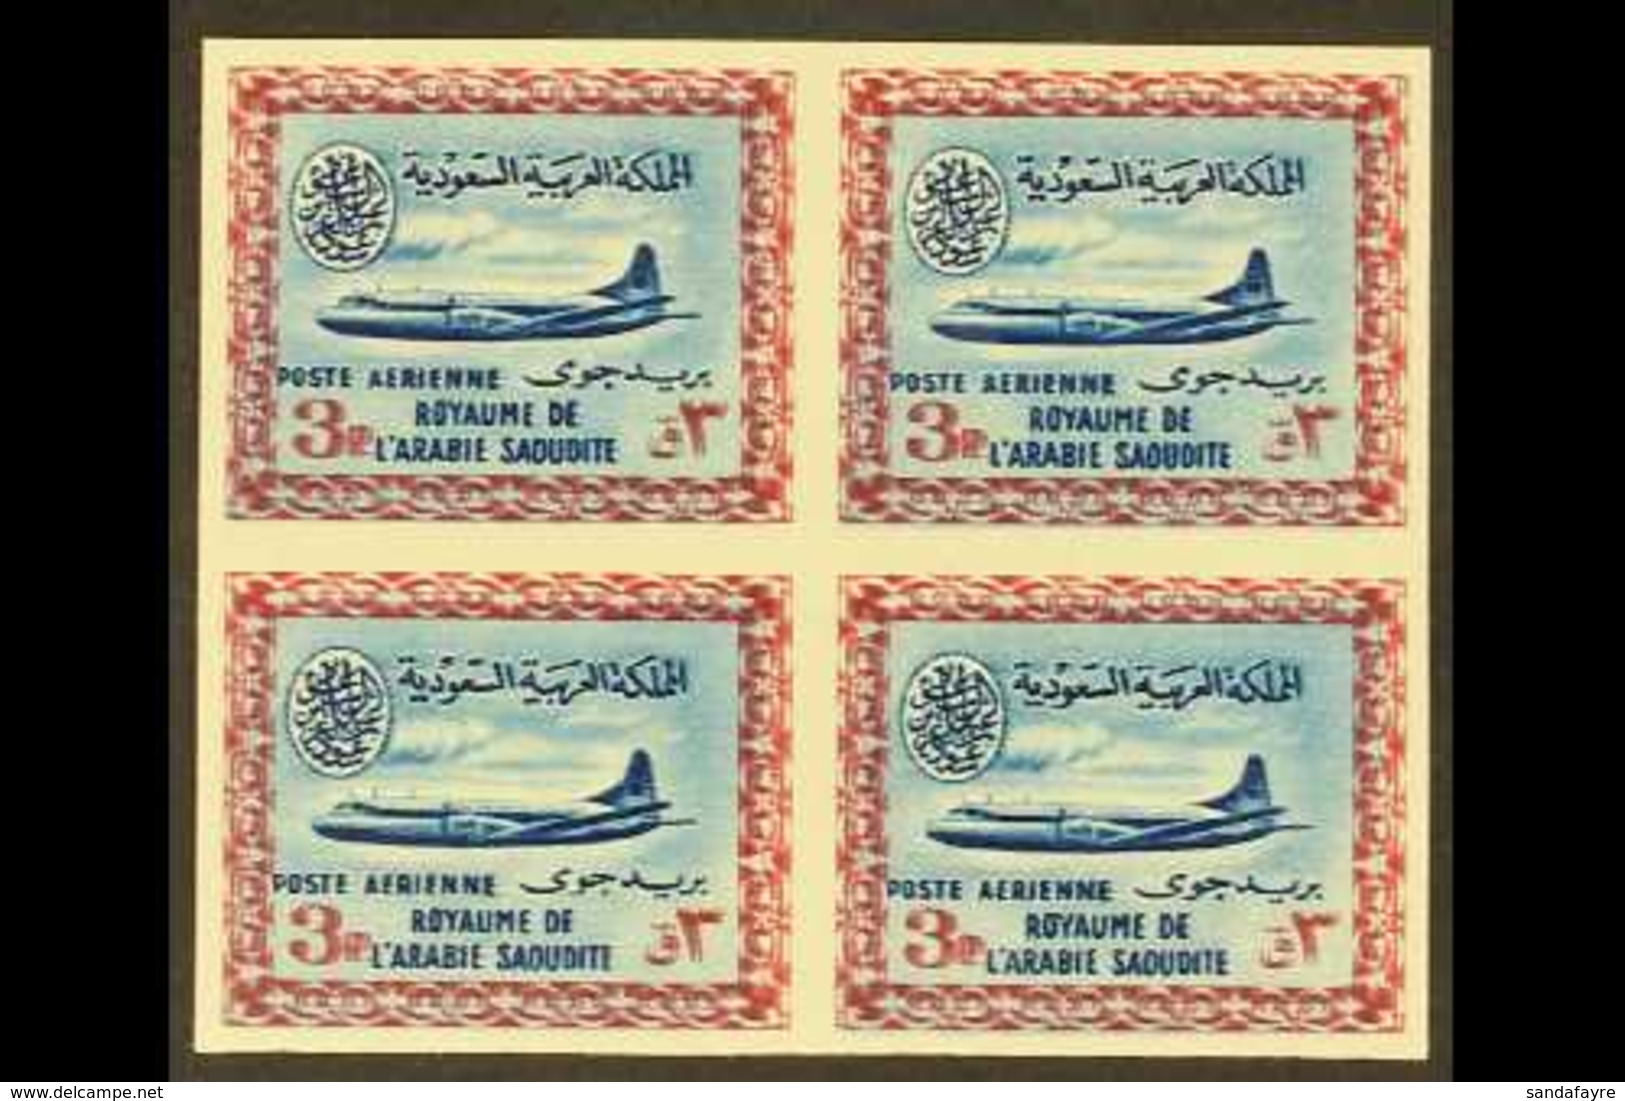 1961 3p Blue And Pale Claret Air, Vickers Viscount, Imperf Block Of 4, Variety "frame Printed Double", As SG 430var (unl - Arabie Saoudite